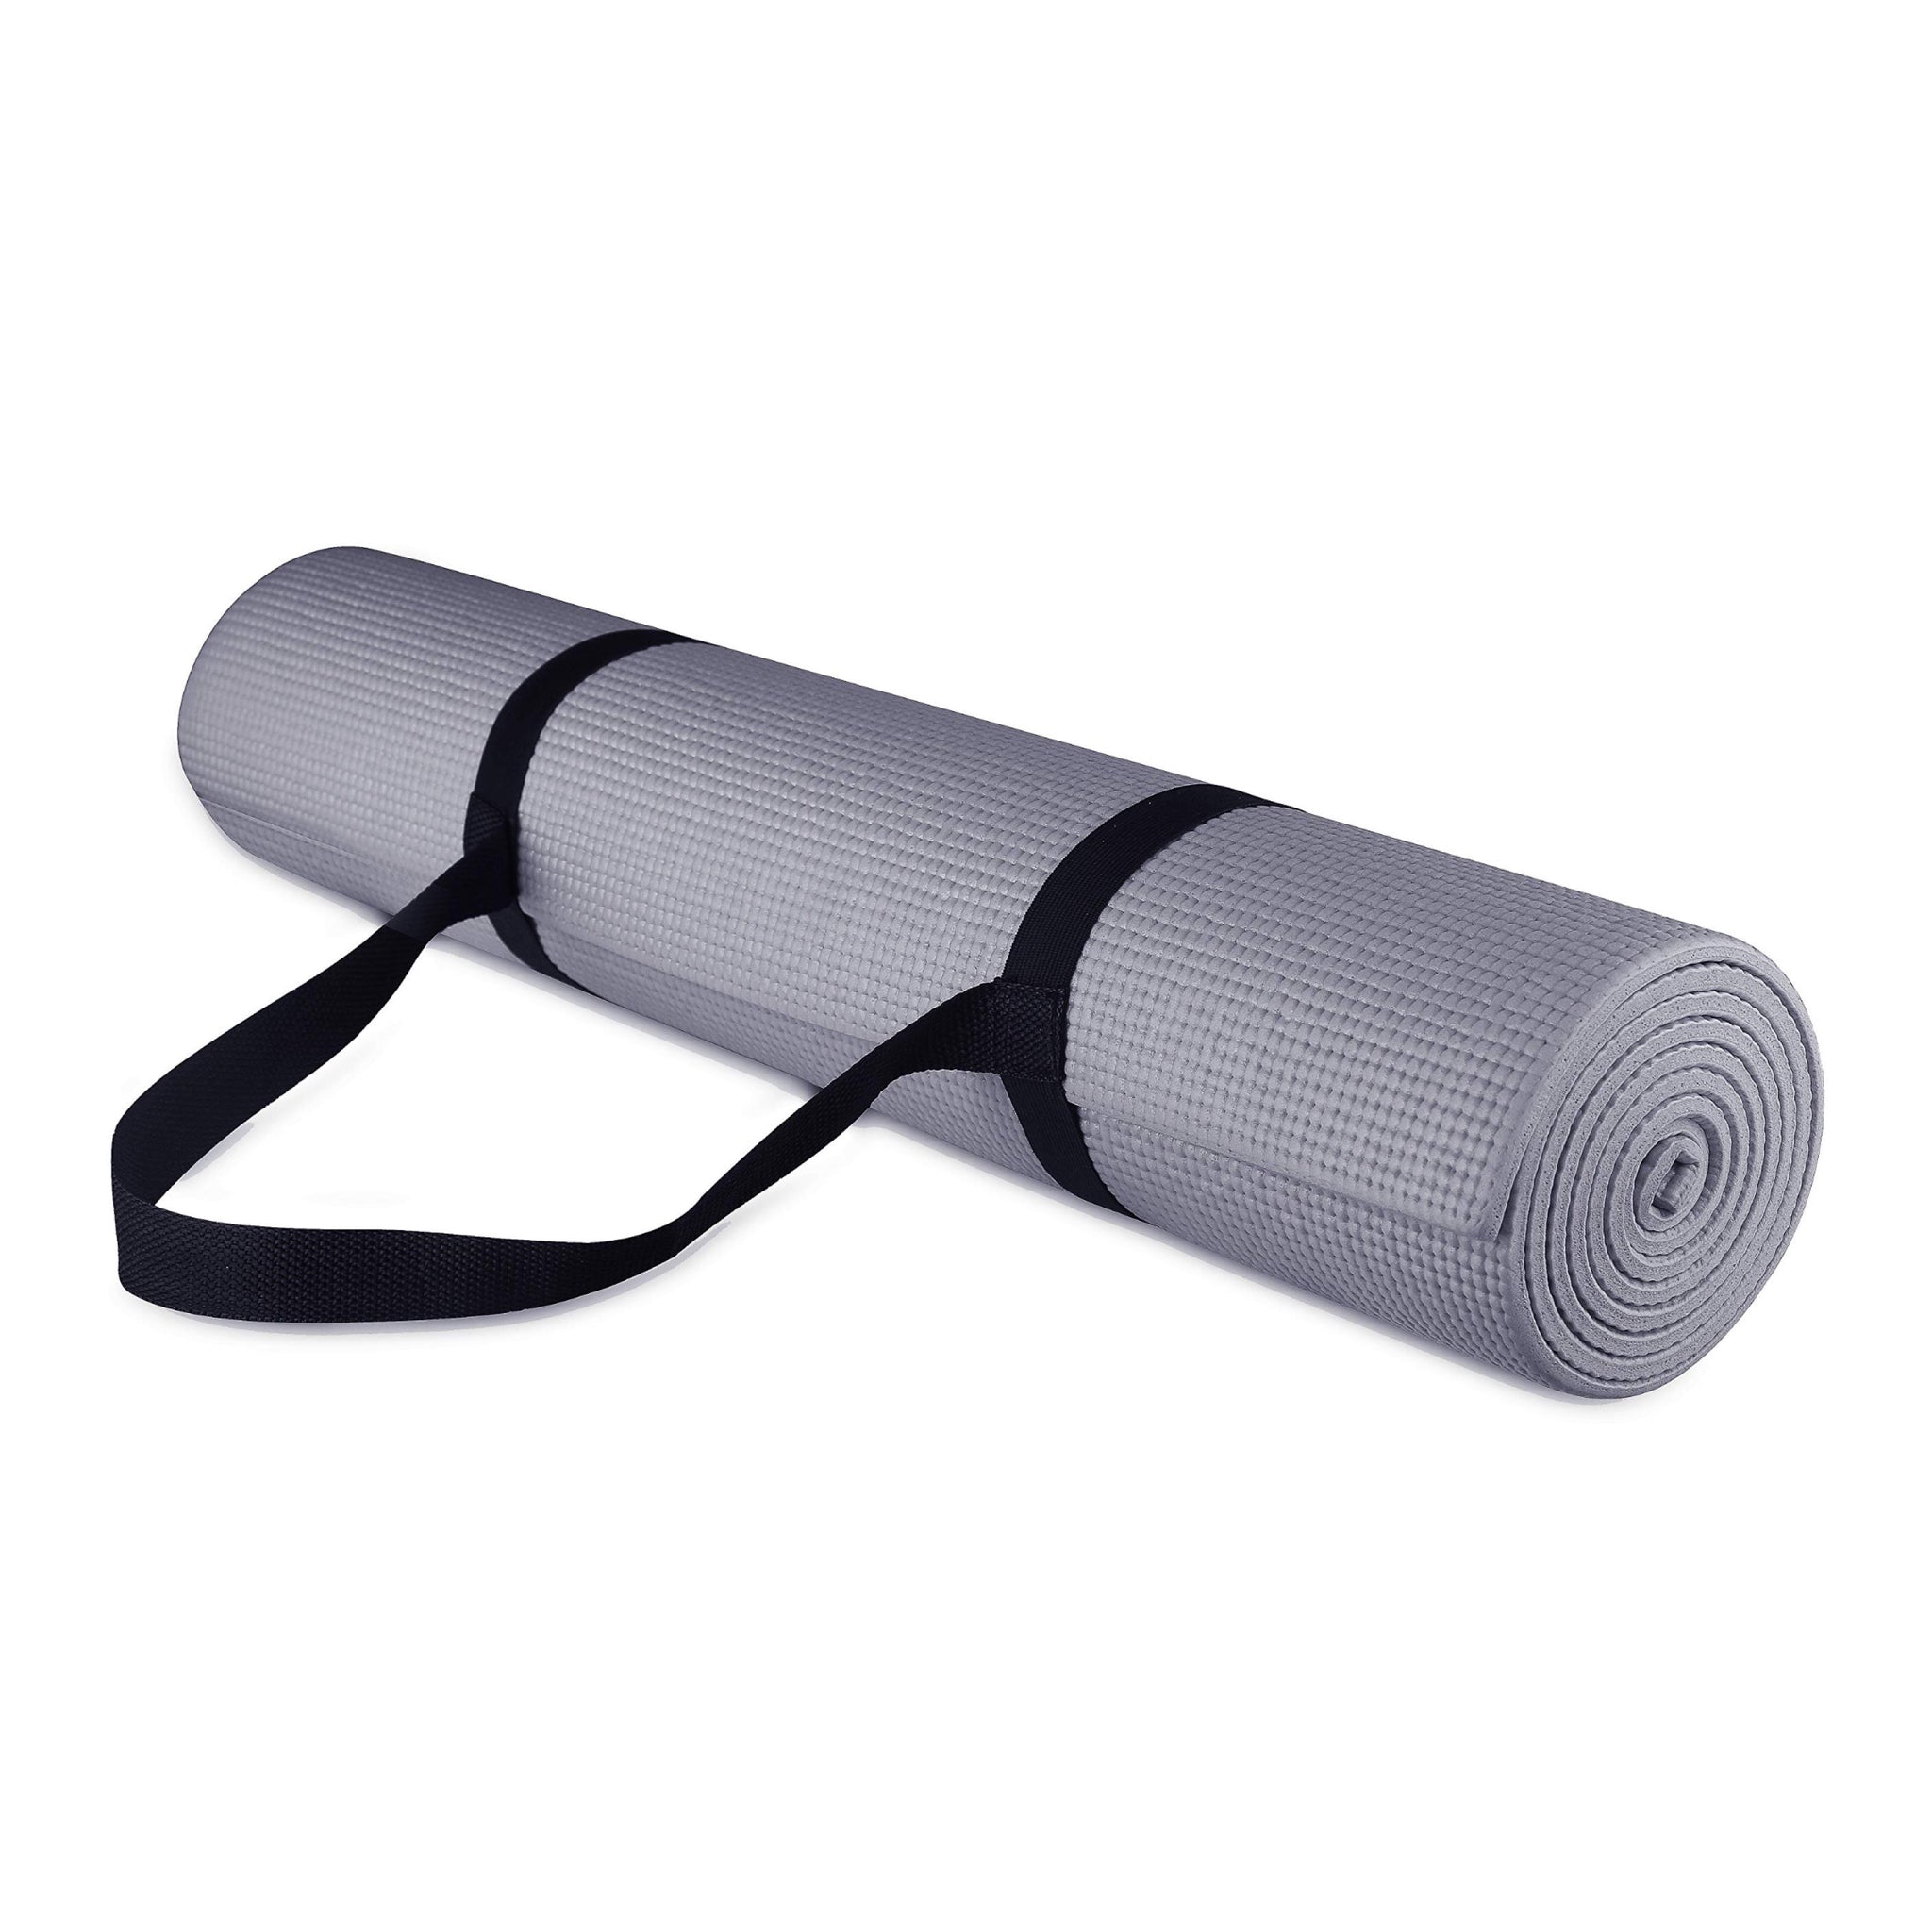 BalanceFrom Go Yoga All Purpose Anti-Tear Exercise Yoga Mat with